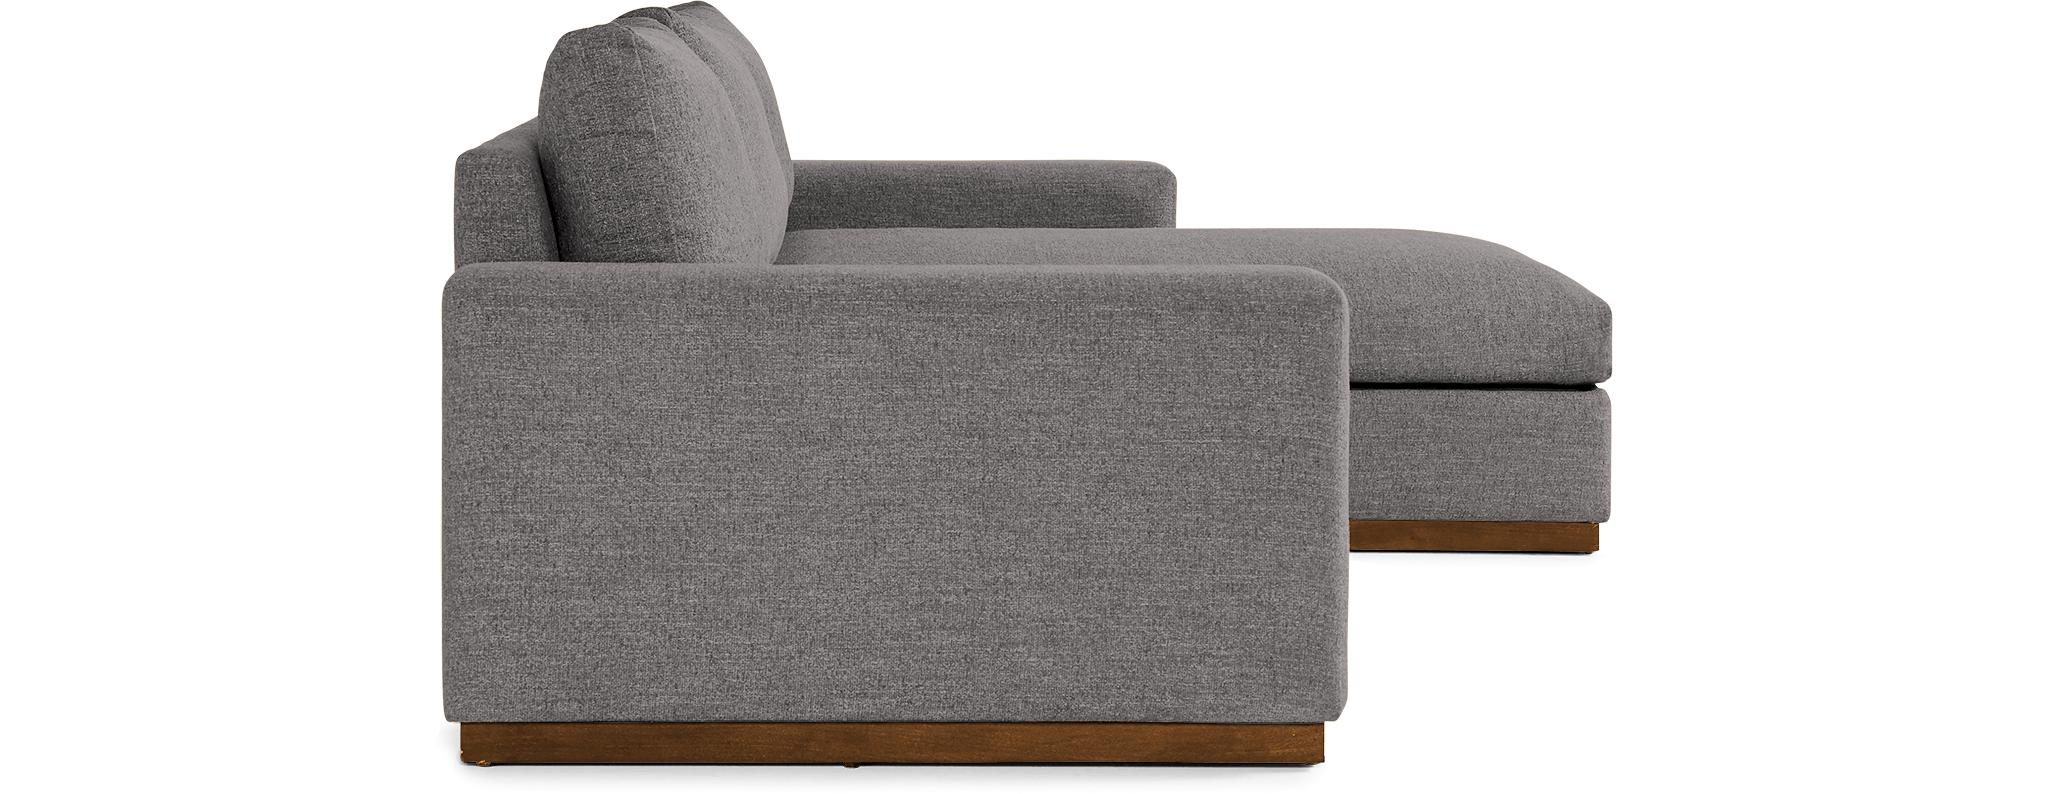 Gray Holt Mid Century Modern Sectional with Storage - Taylor Felt Grey - Mocha - Right - Image 2